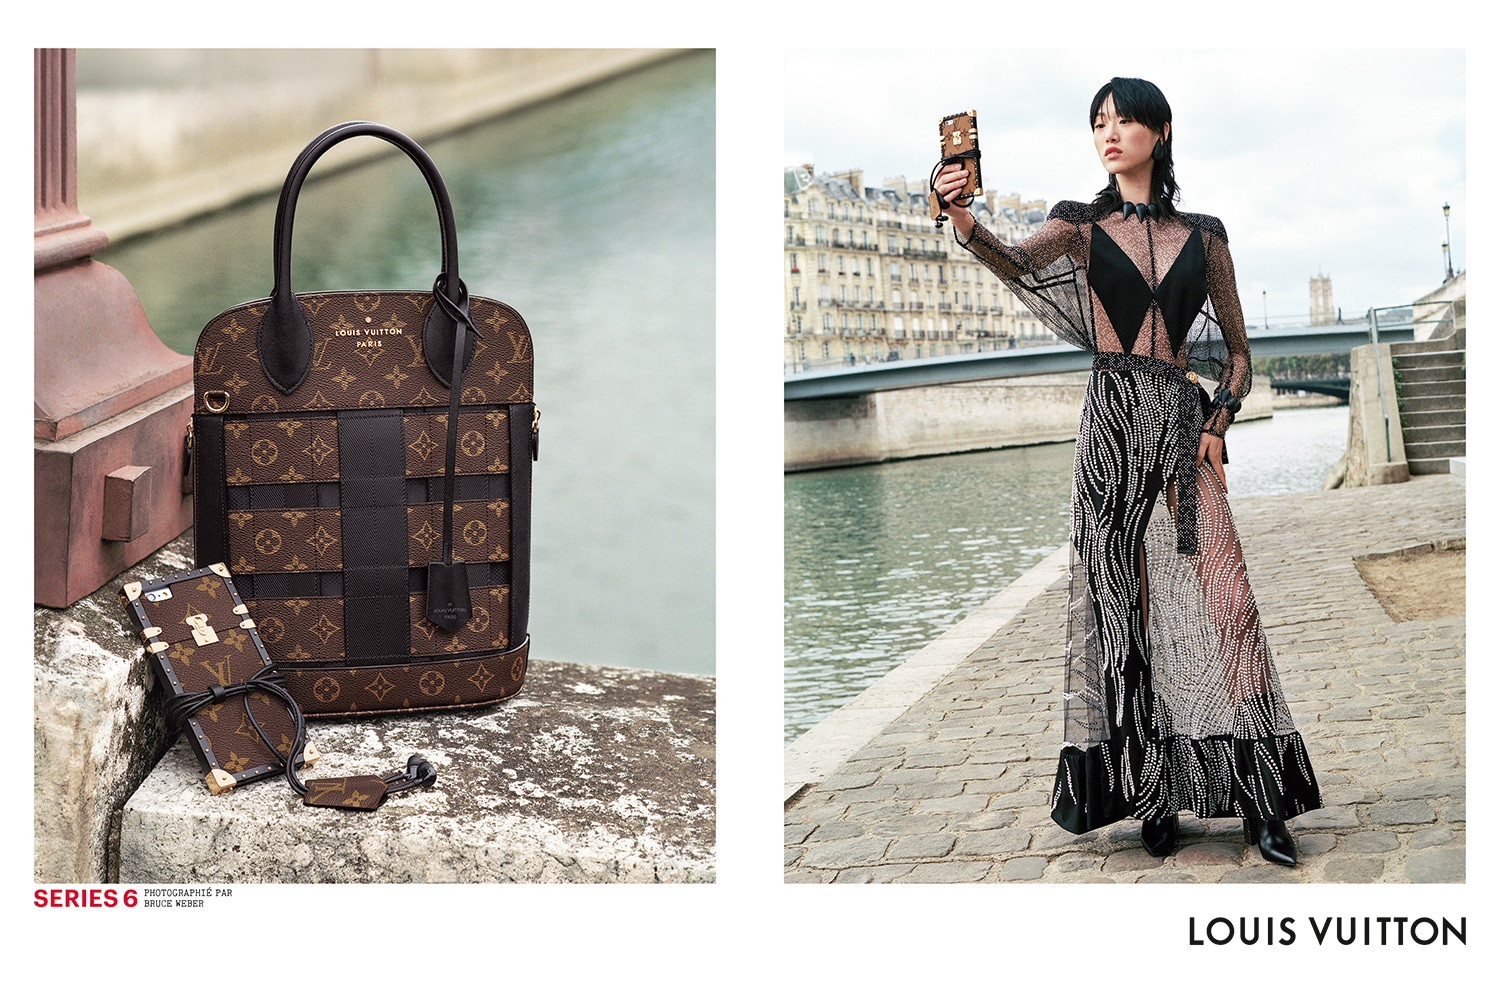 Louis Vuitton Spring/Summer 2017 Series 6 Ad Campaign | Spotted Fashion